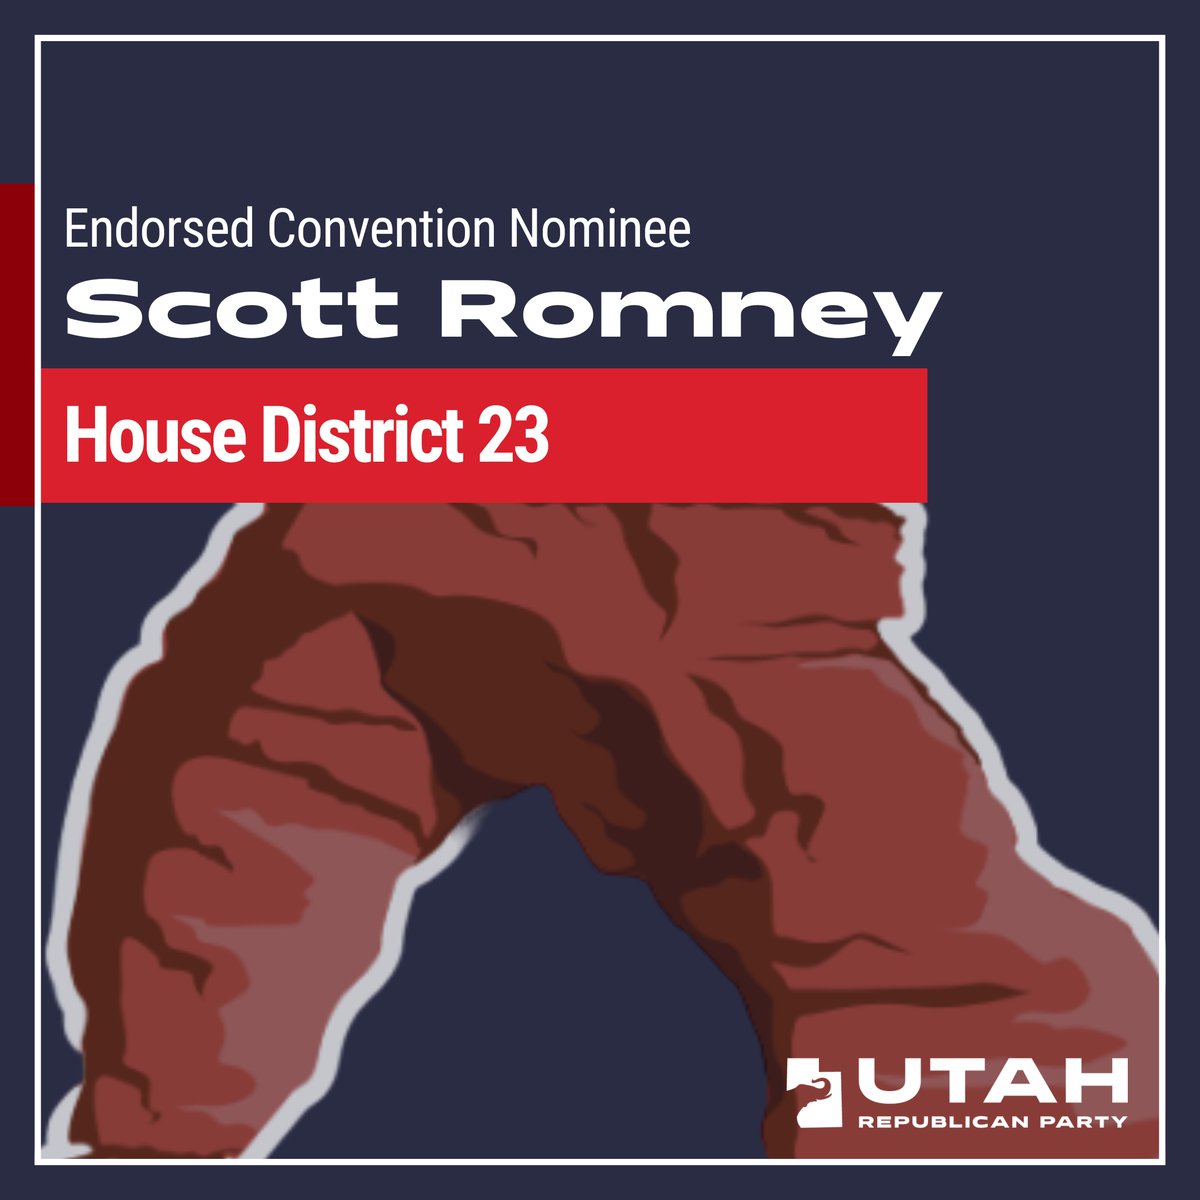 Scott Romney is the UT GOP's Endorsed Convention Nominee for House District 23! Congratulations Scott!